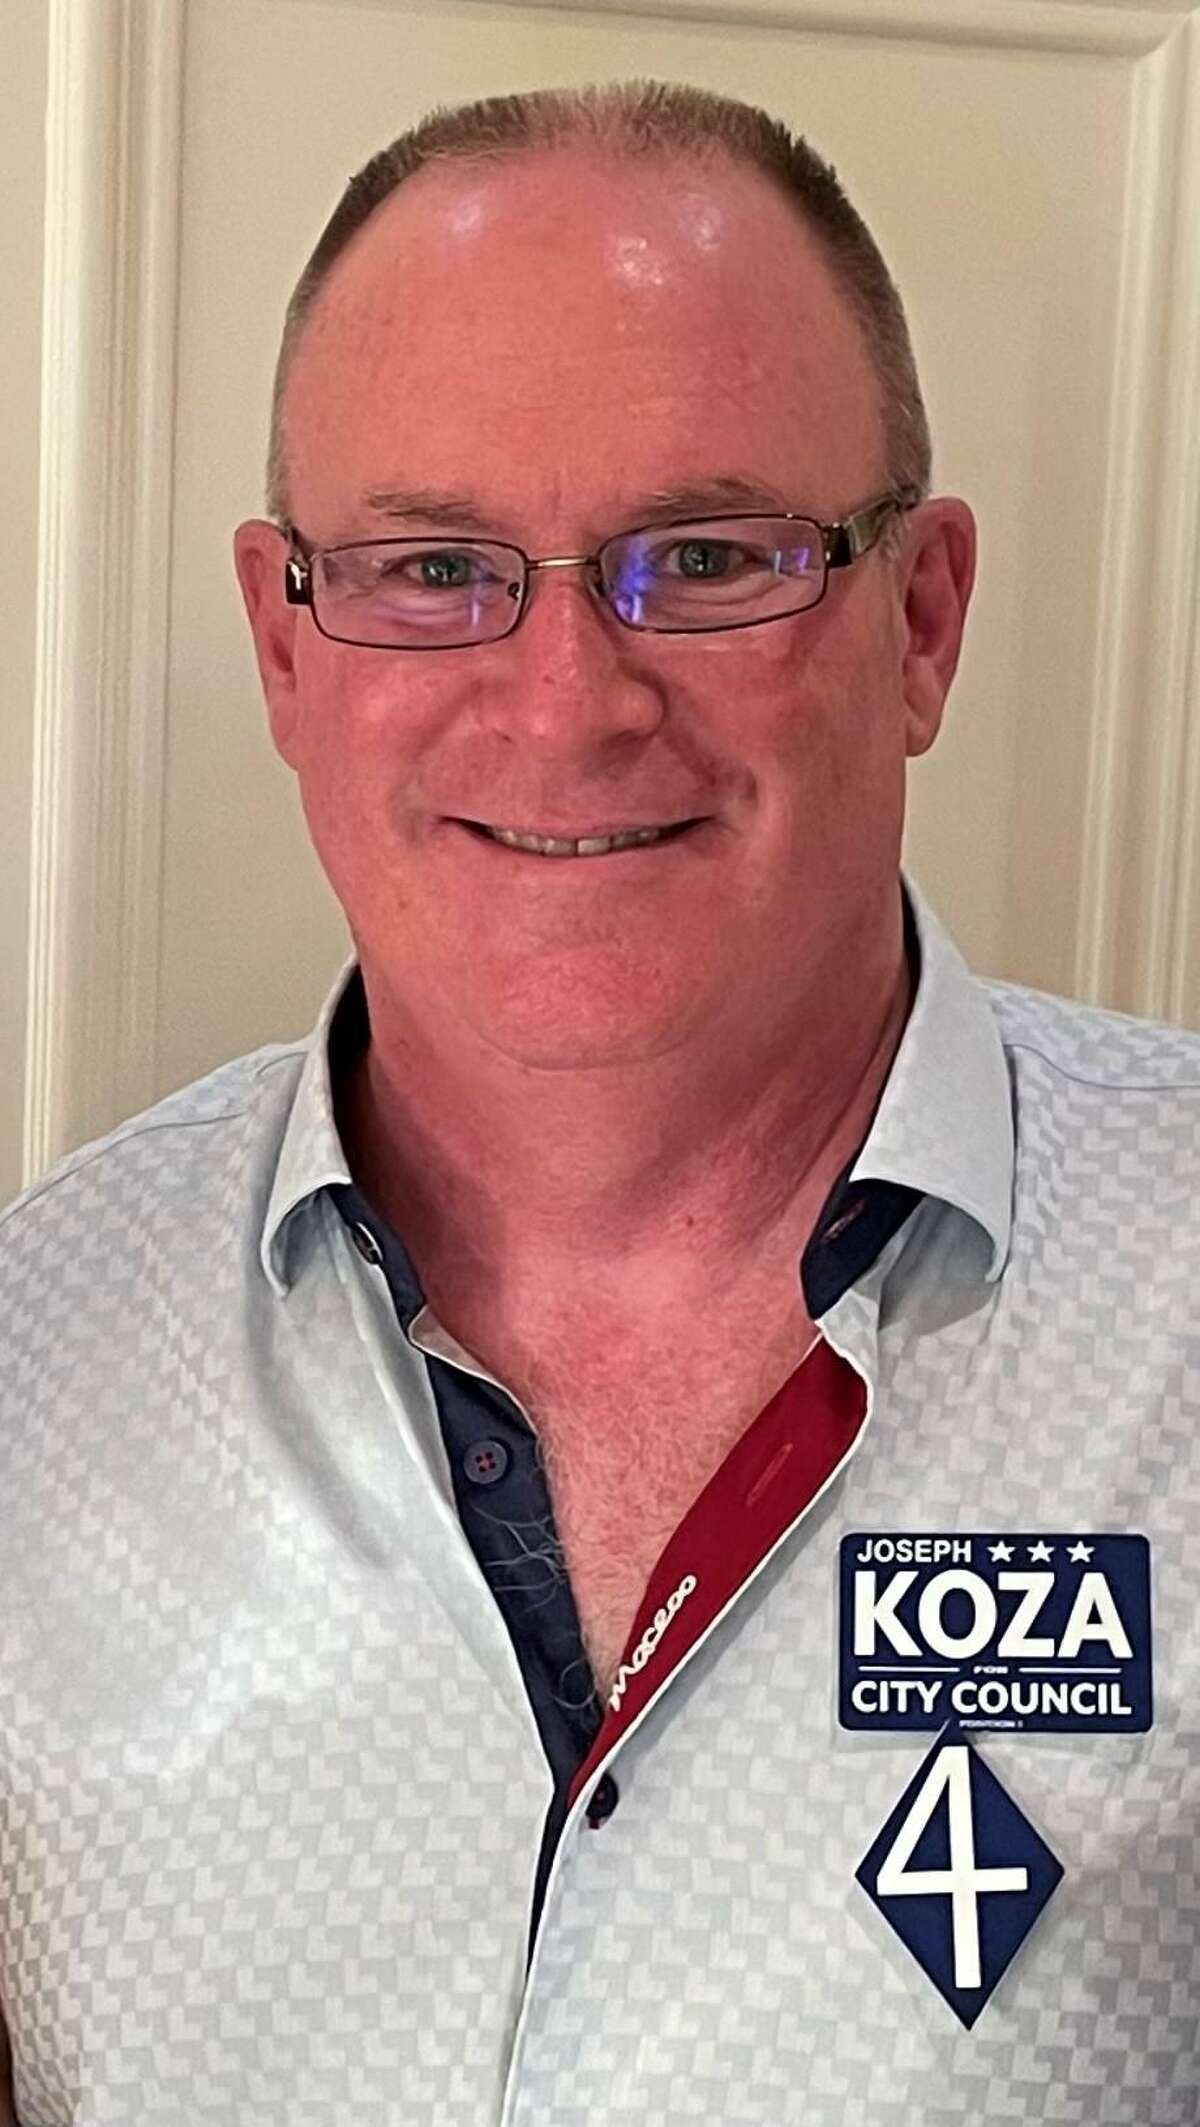 Business owner Joseph Koza has won election to Pearland City Council Position 1, defeating incumbent Luke Orlando, according to unofficial results from the May 7 election.